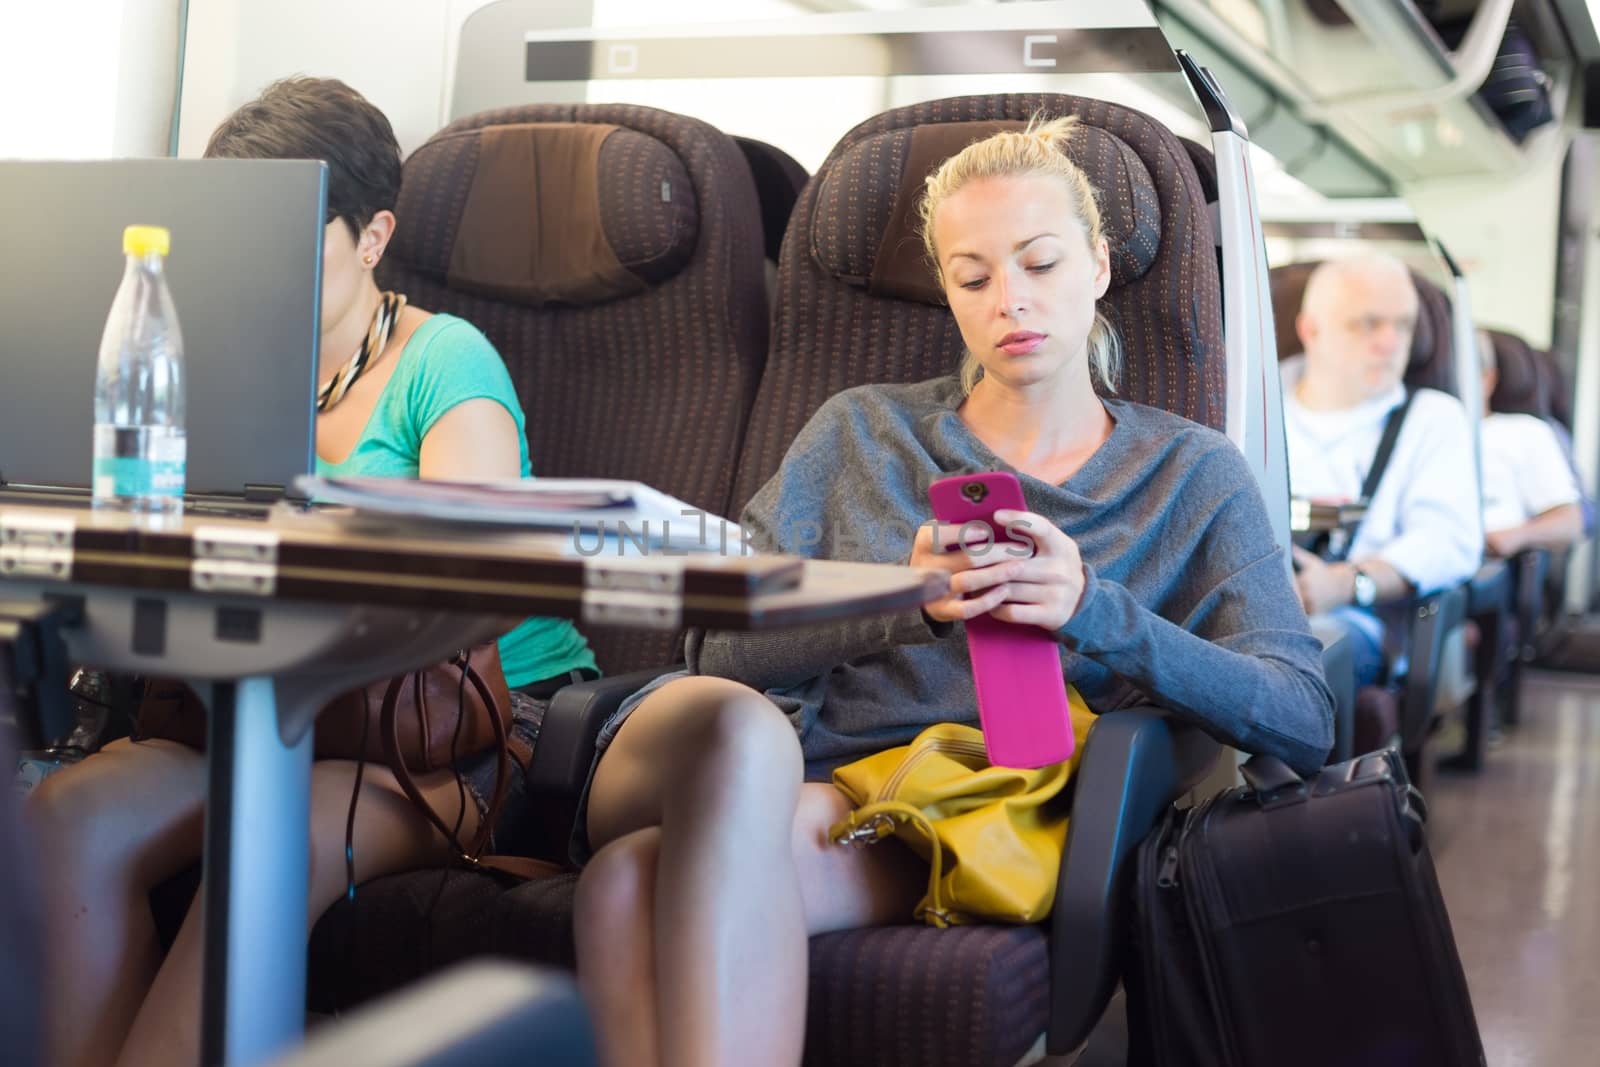 Thoughtful young lady surfing online on smartphone while traveling by train.